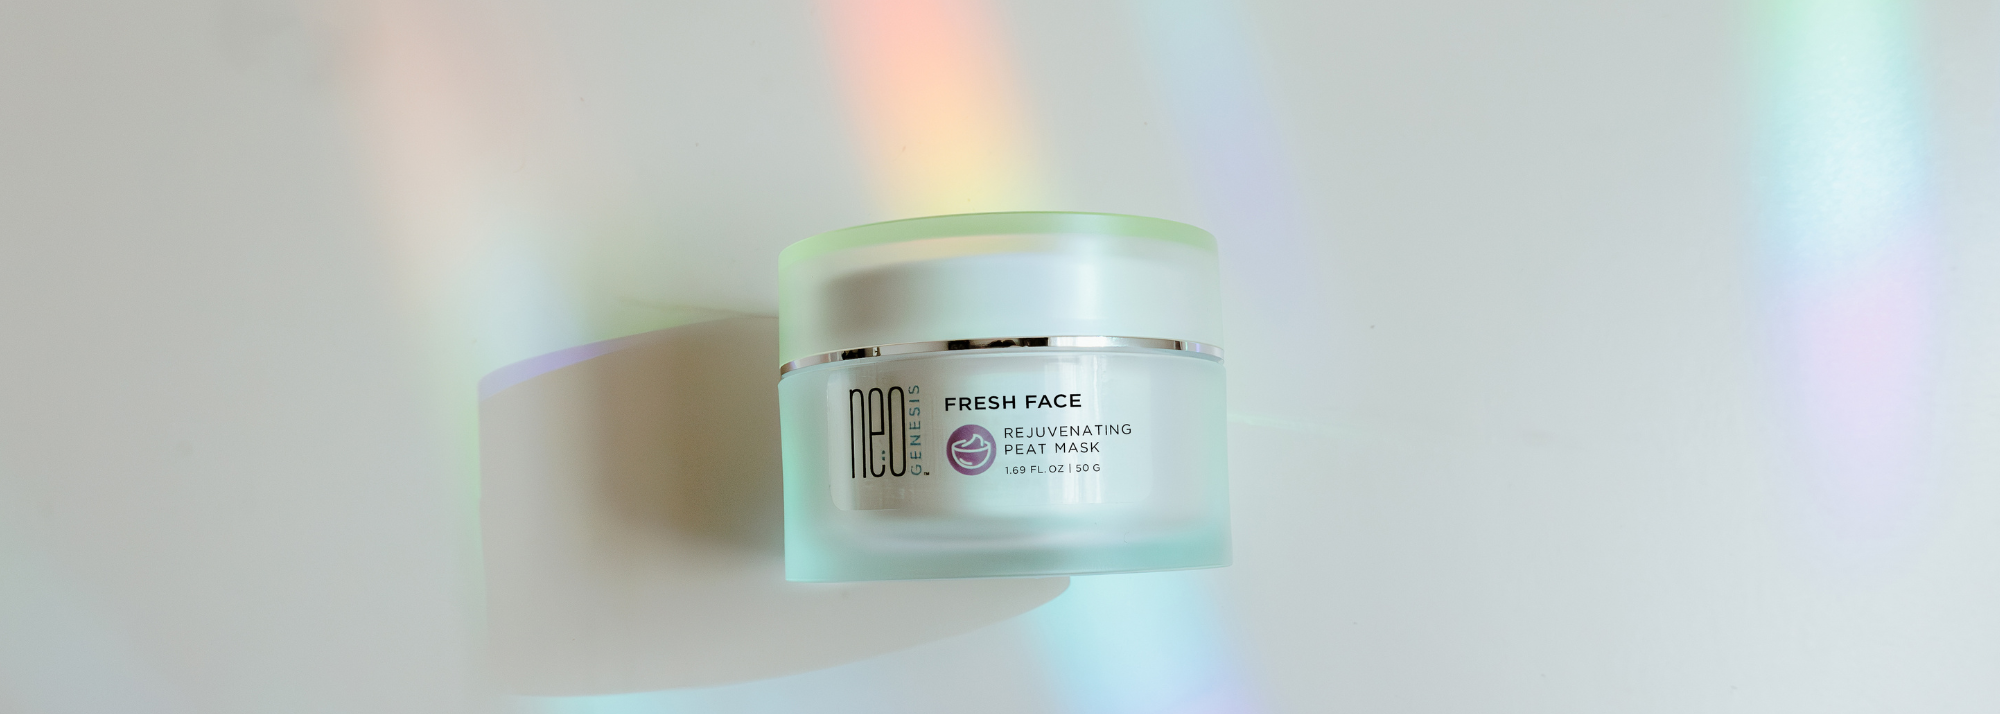 Introducing Fresh Face: New Exfoliating Peat Mask by NeoGenesis